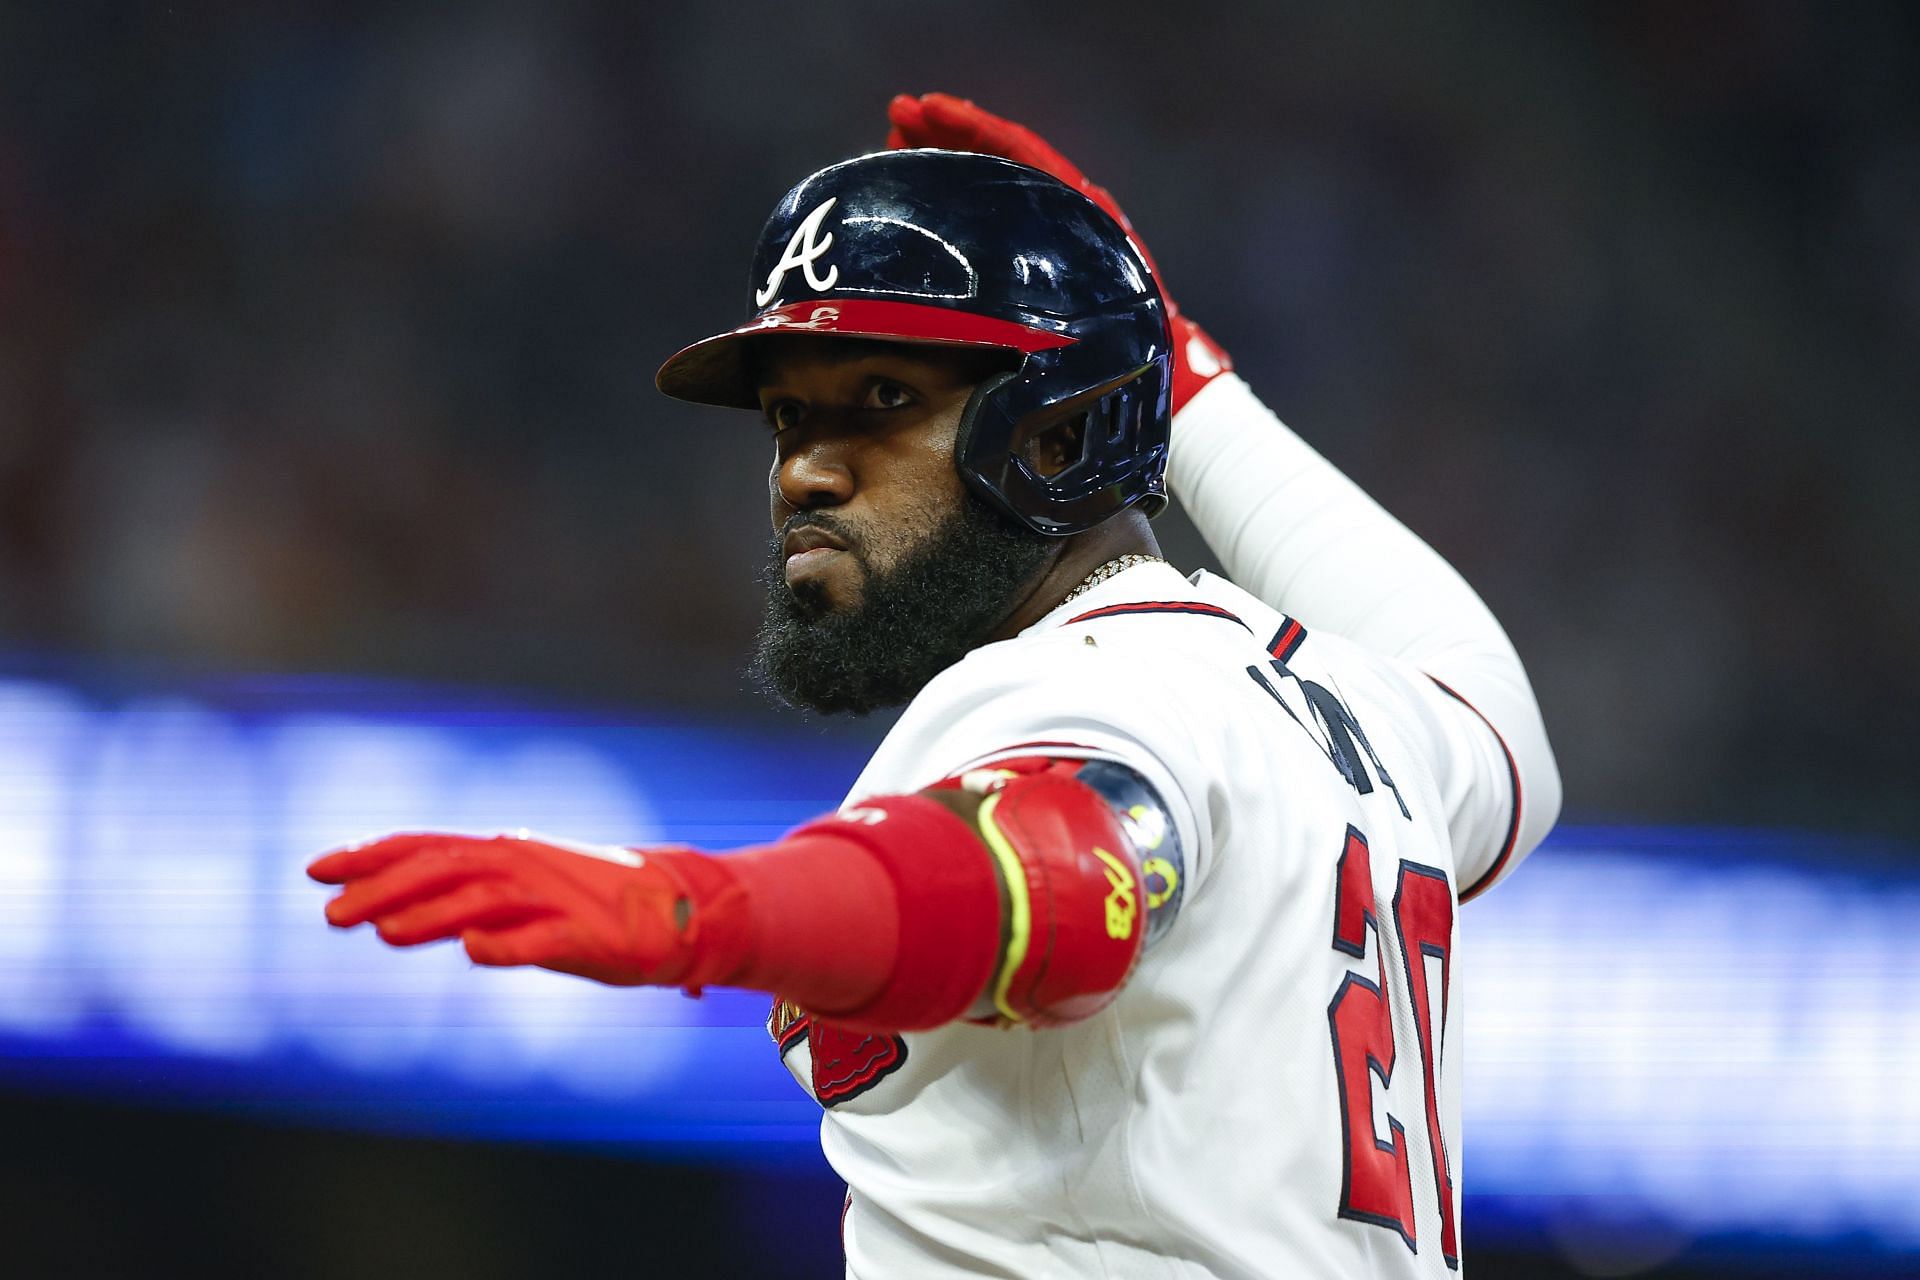 Braves outfielder Marcell Ozuna was arrested for DUI in the early hours of Friday morning.